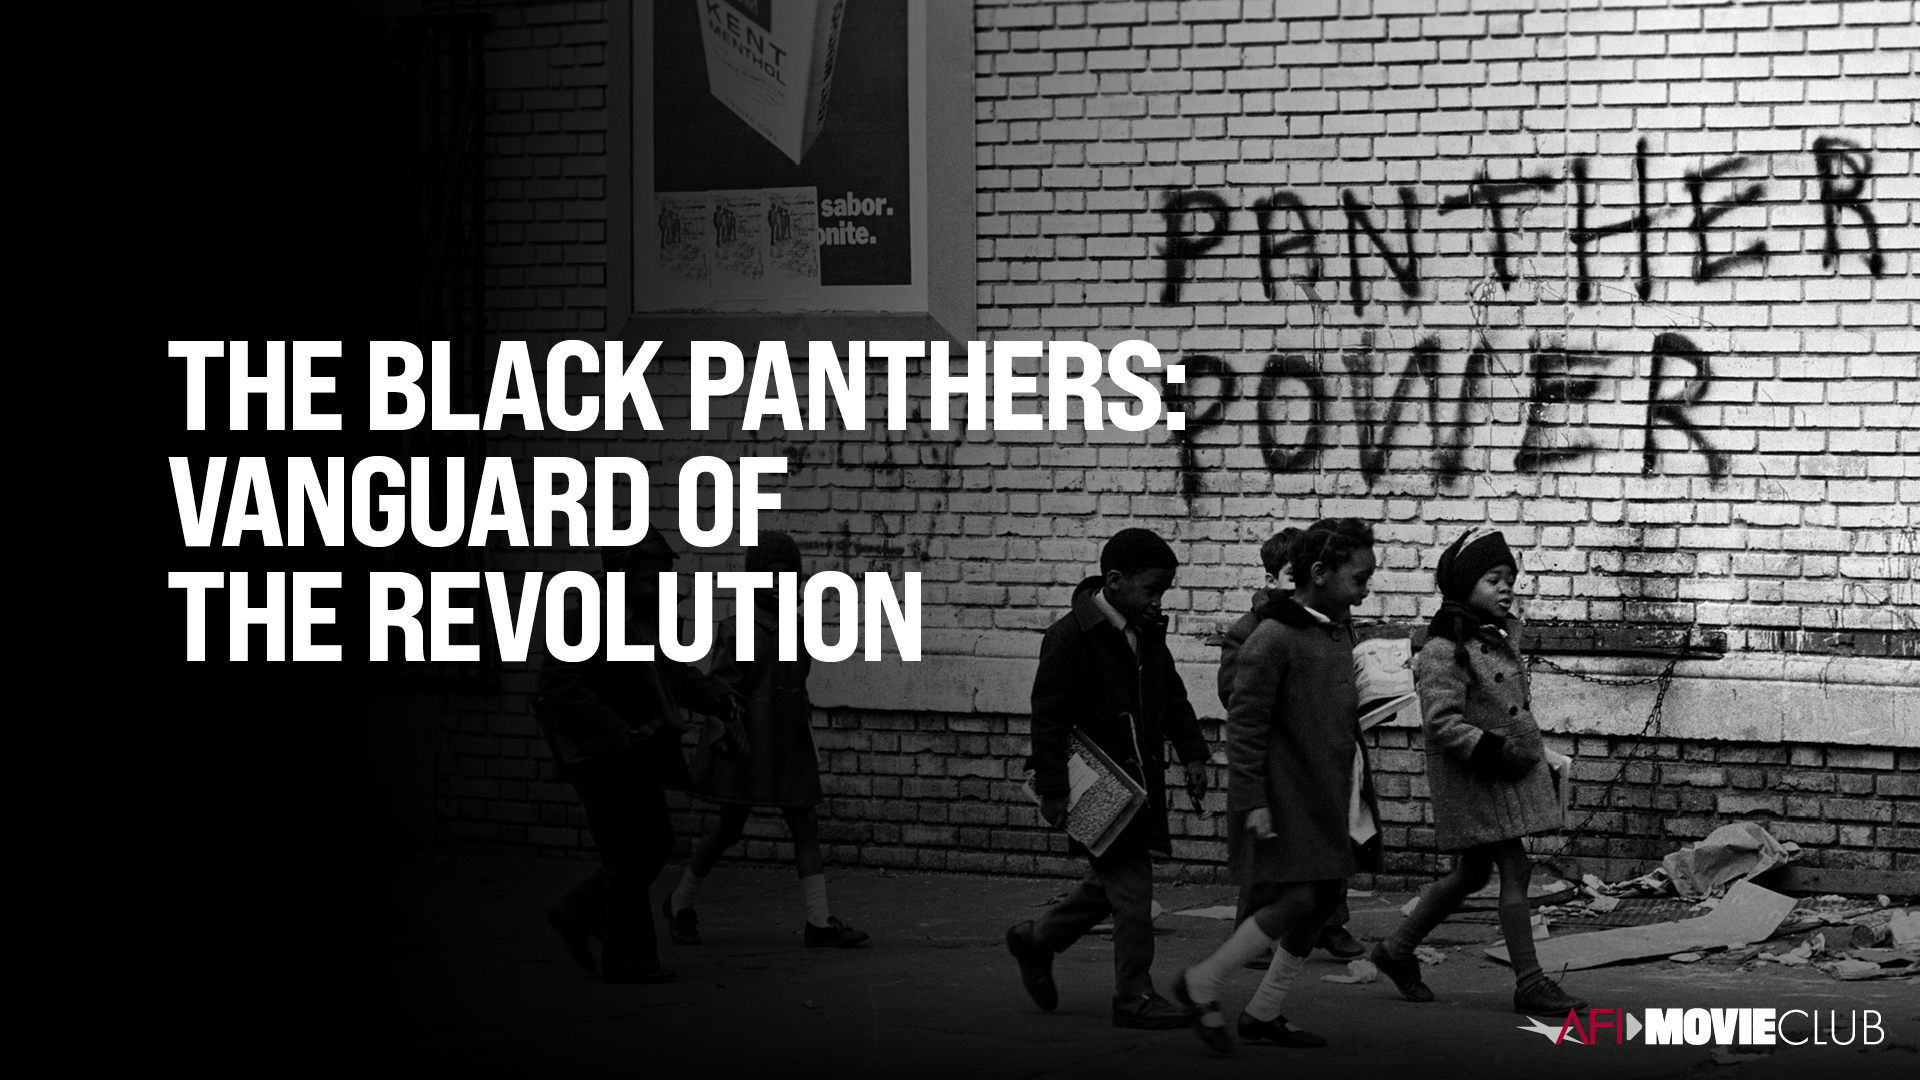 The Black Panthers: Vanguard of the Revolution Film Still